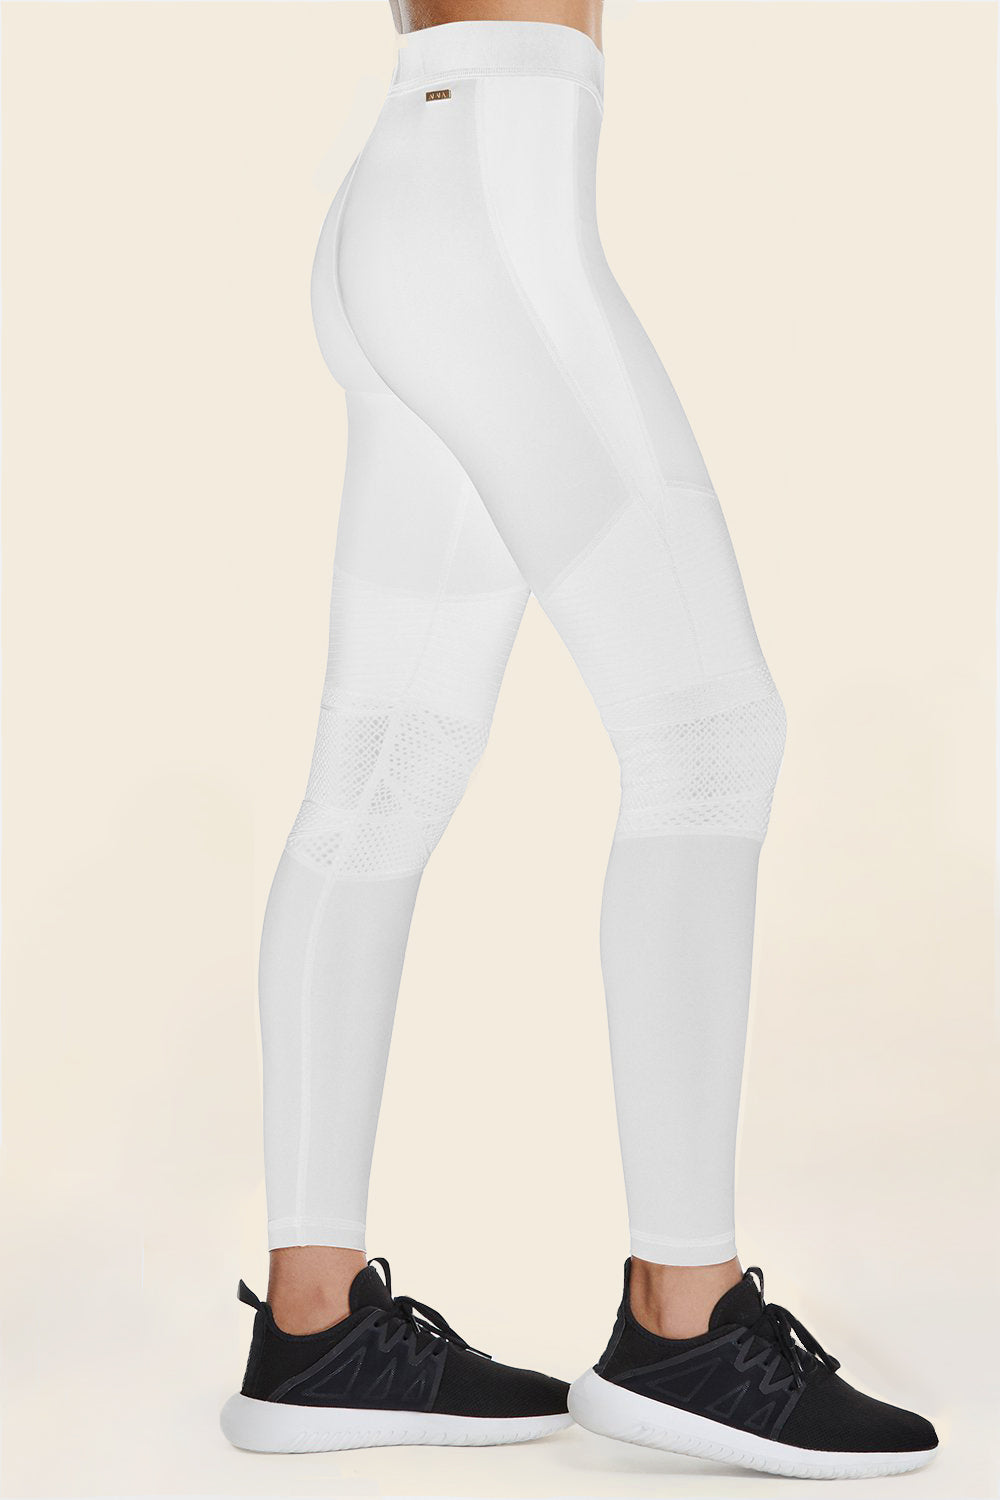 Side view of Alala Women's Luxury Athleisure harley tight in white with lace detailing